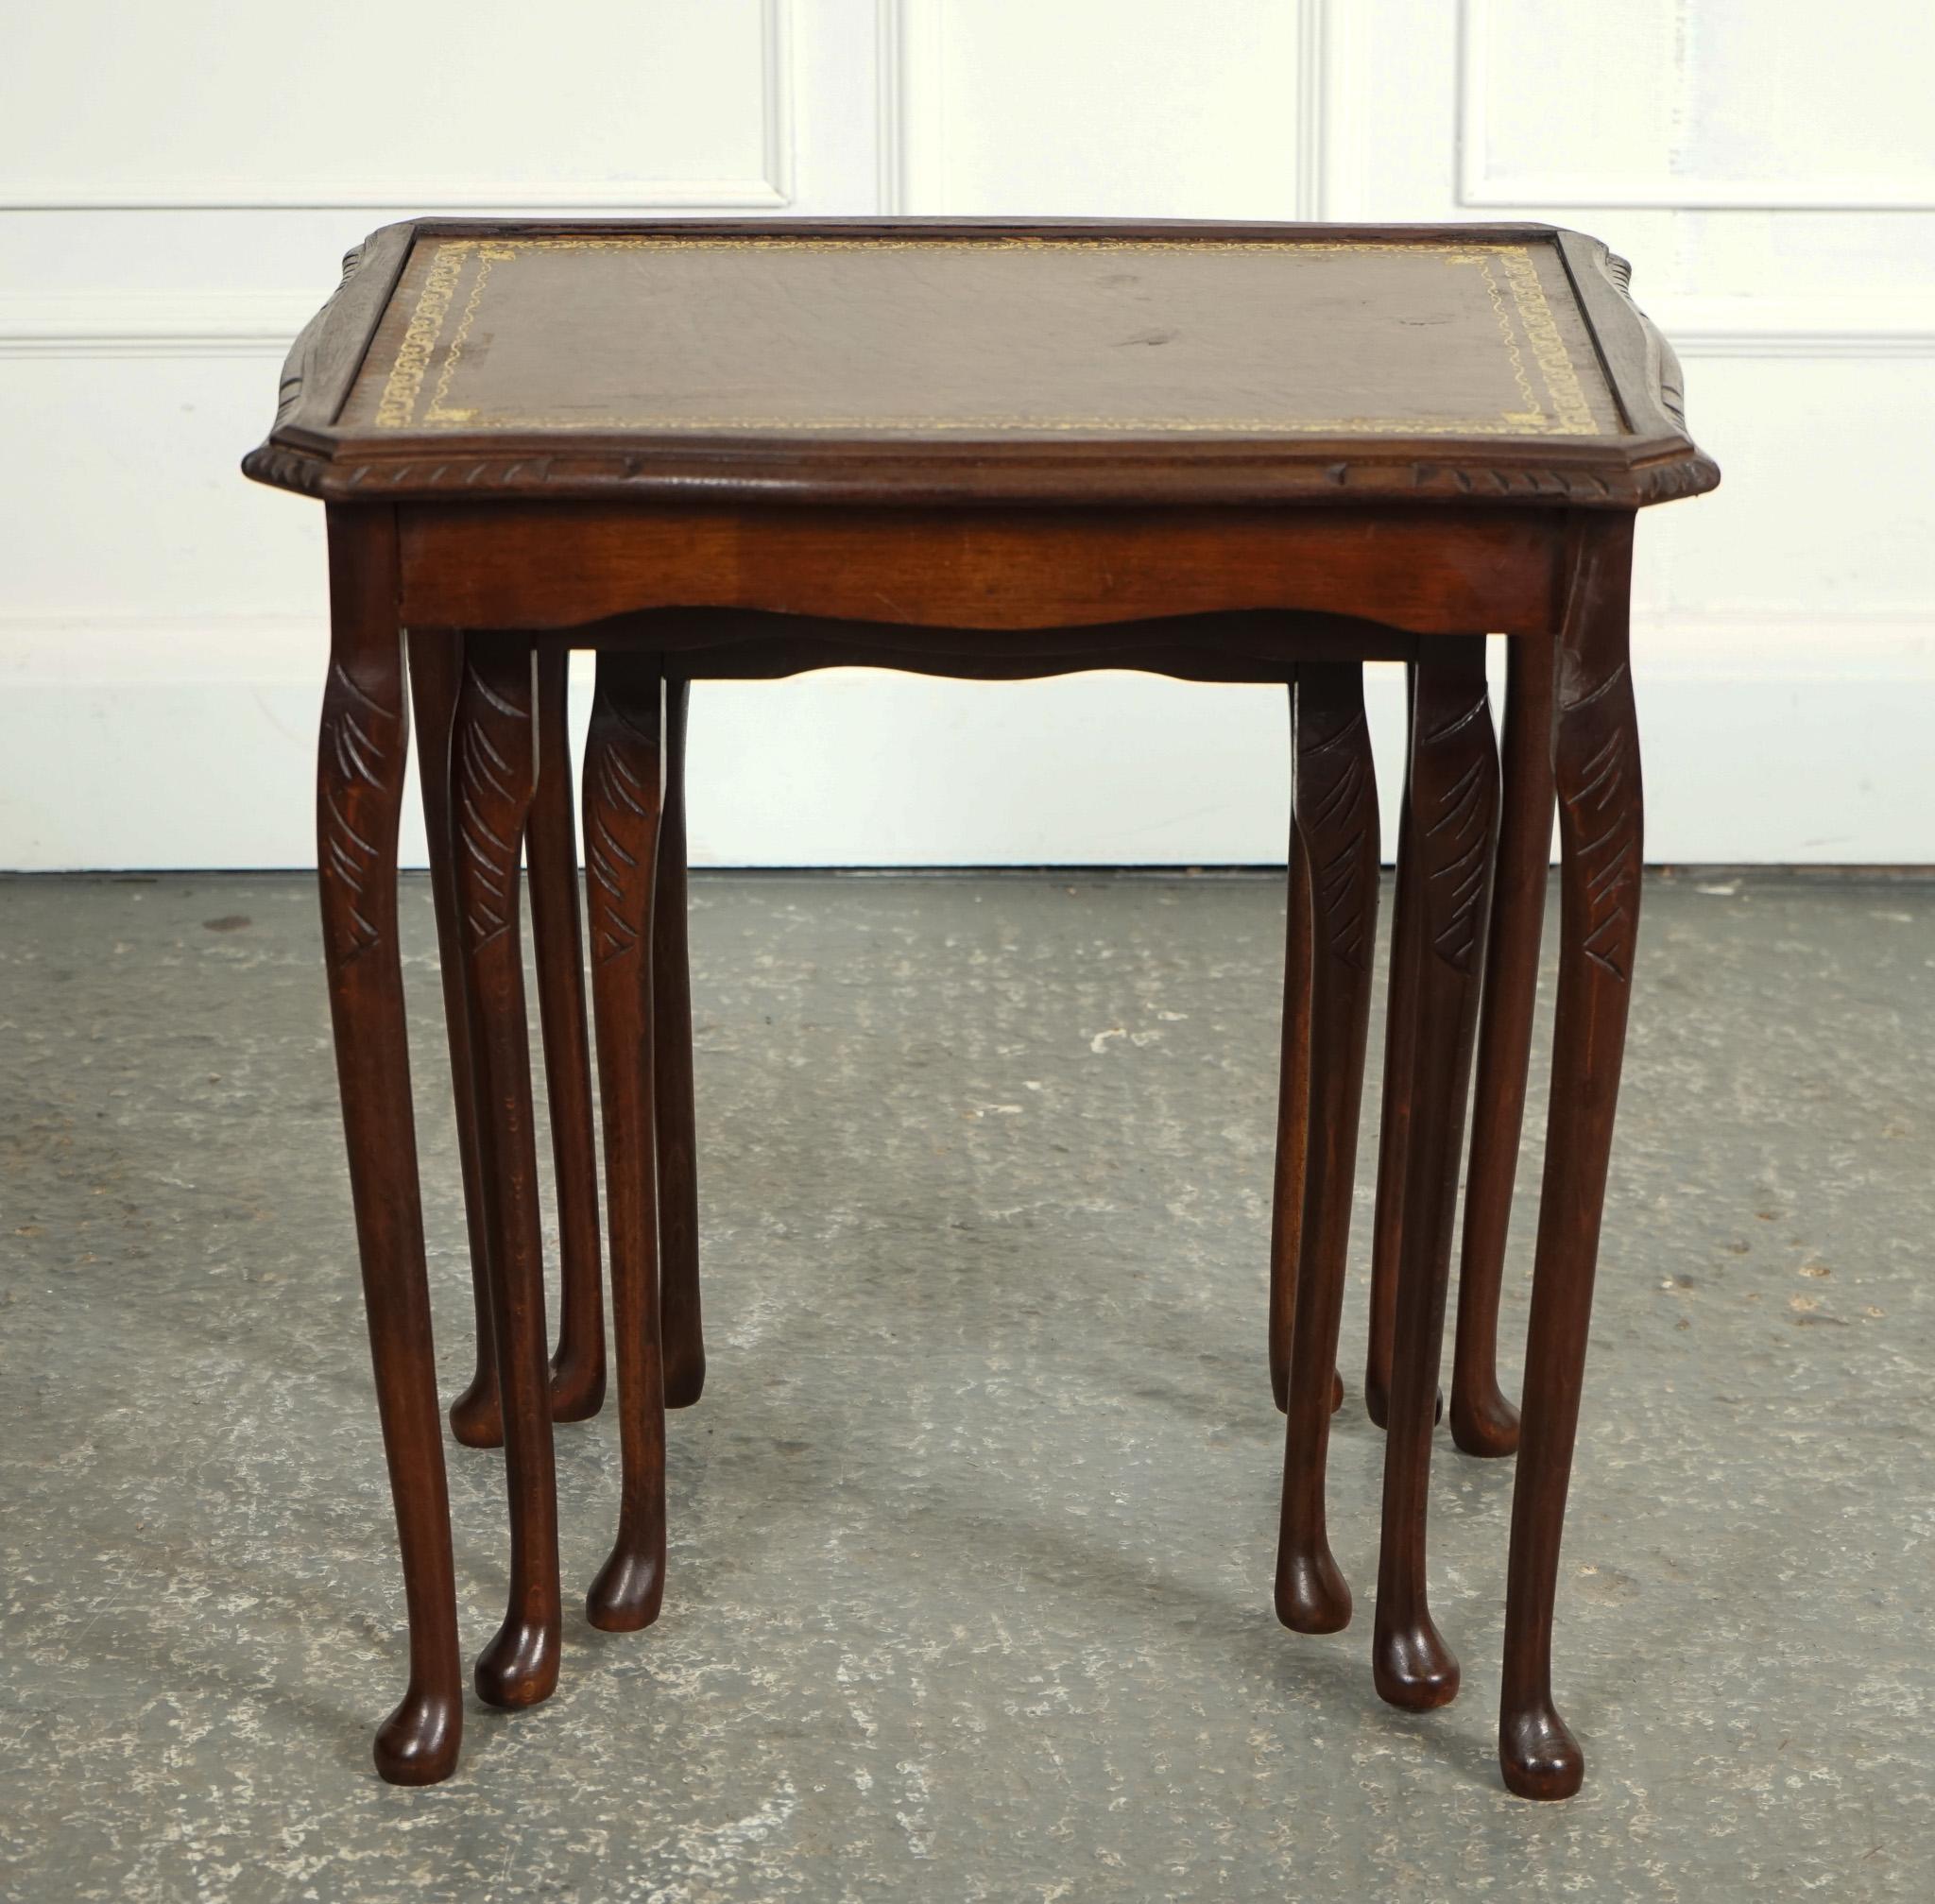 20ième siècle VINTAGE NEST OF TABLES QUEEN ANNE STYLE LEGS WiTH BROWN EMBOSsed LEATHER top en vente